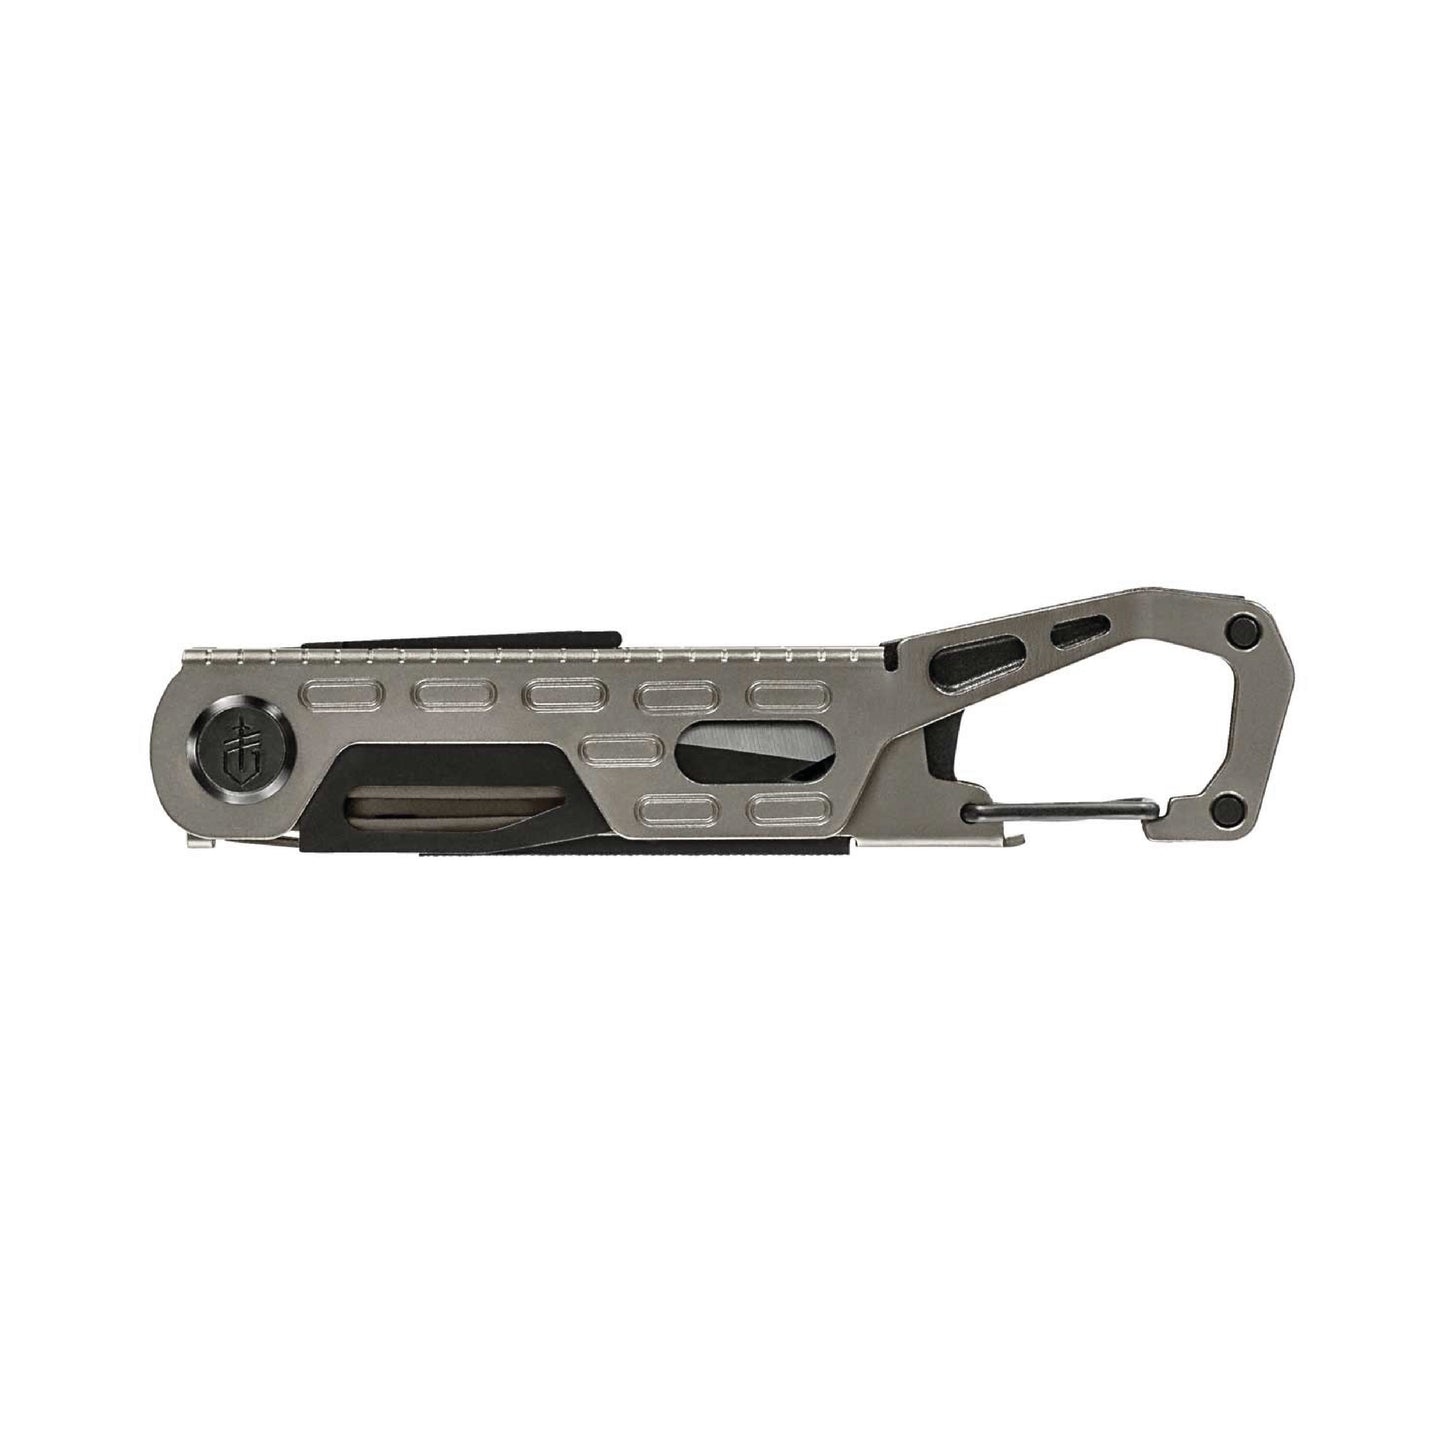 GERBER Multitool STAKE OUT